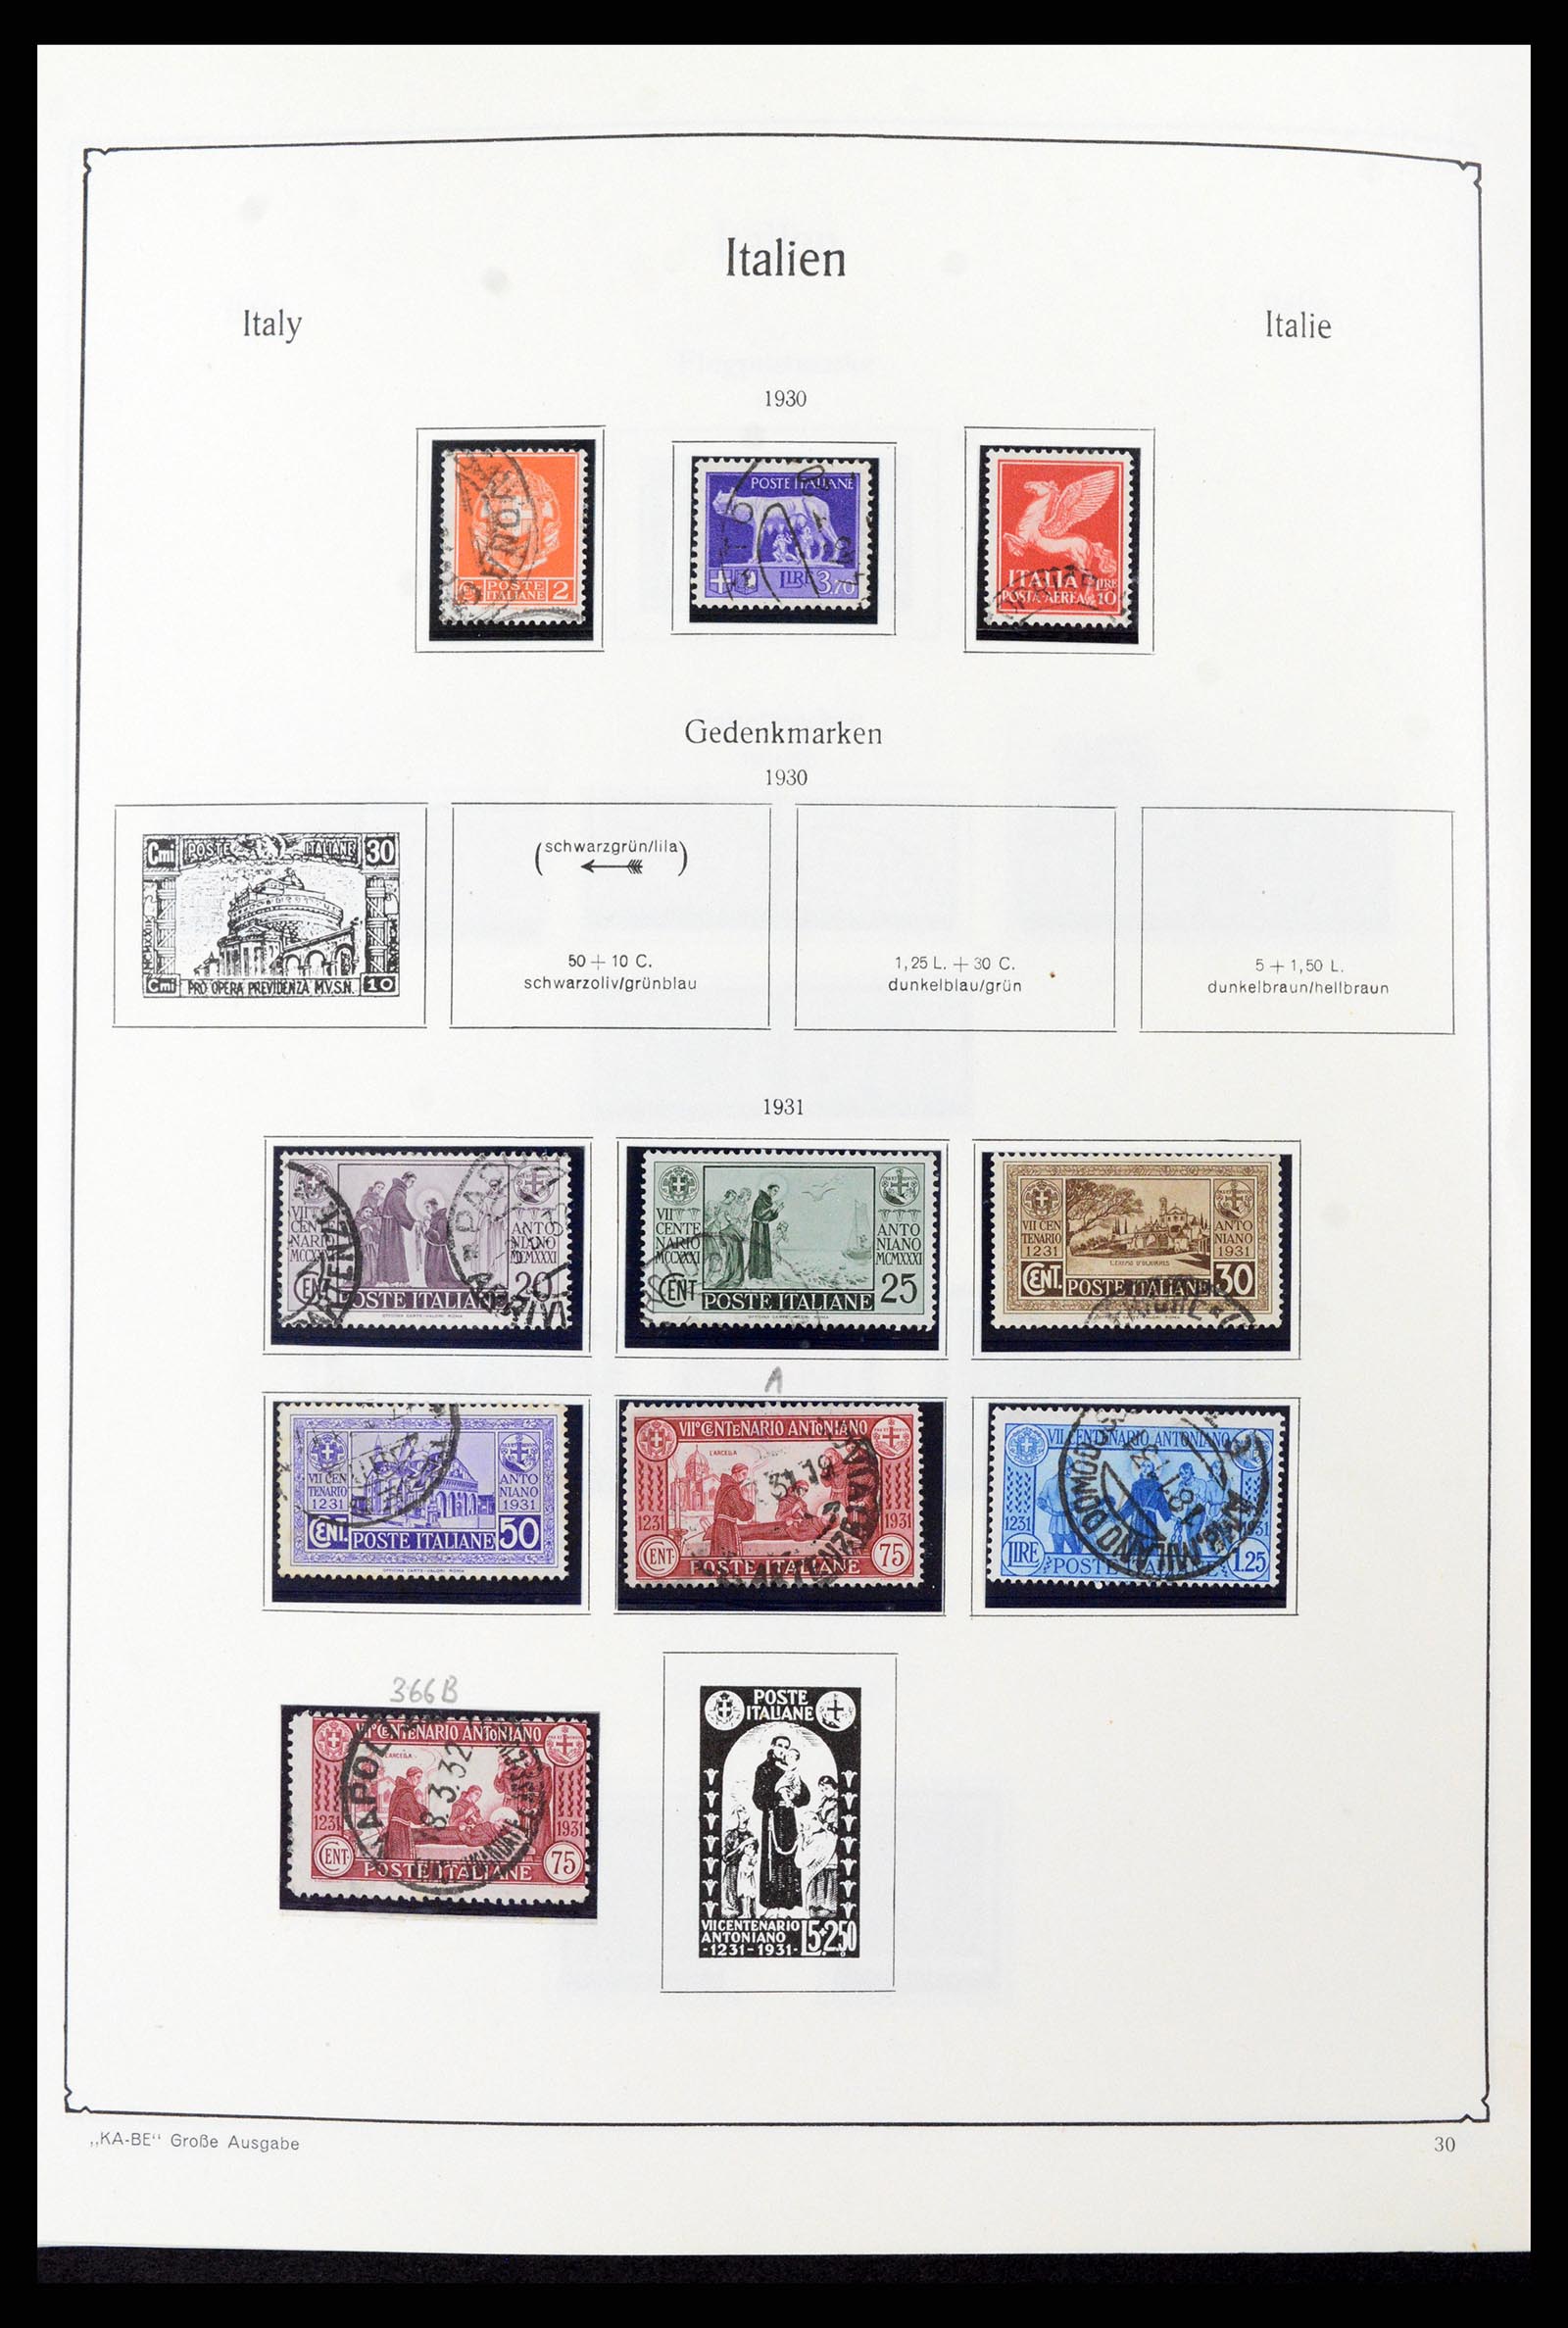 37605 048 - Stamp collection 37605 Italy and States 1855-1974.